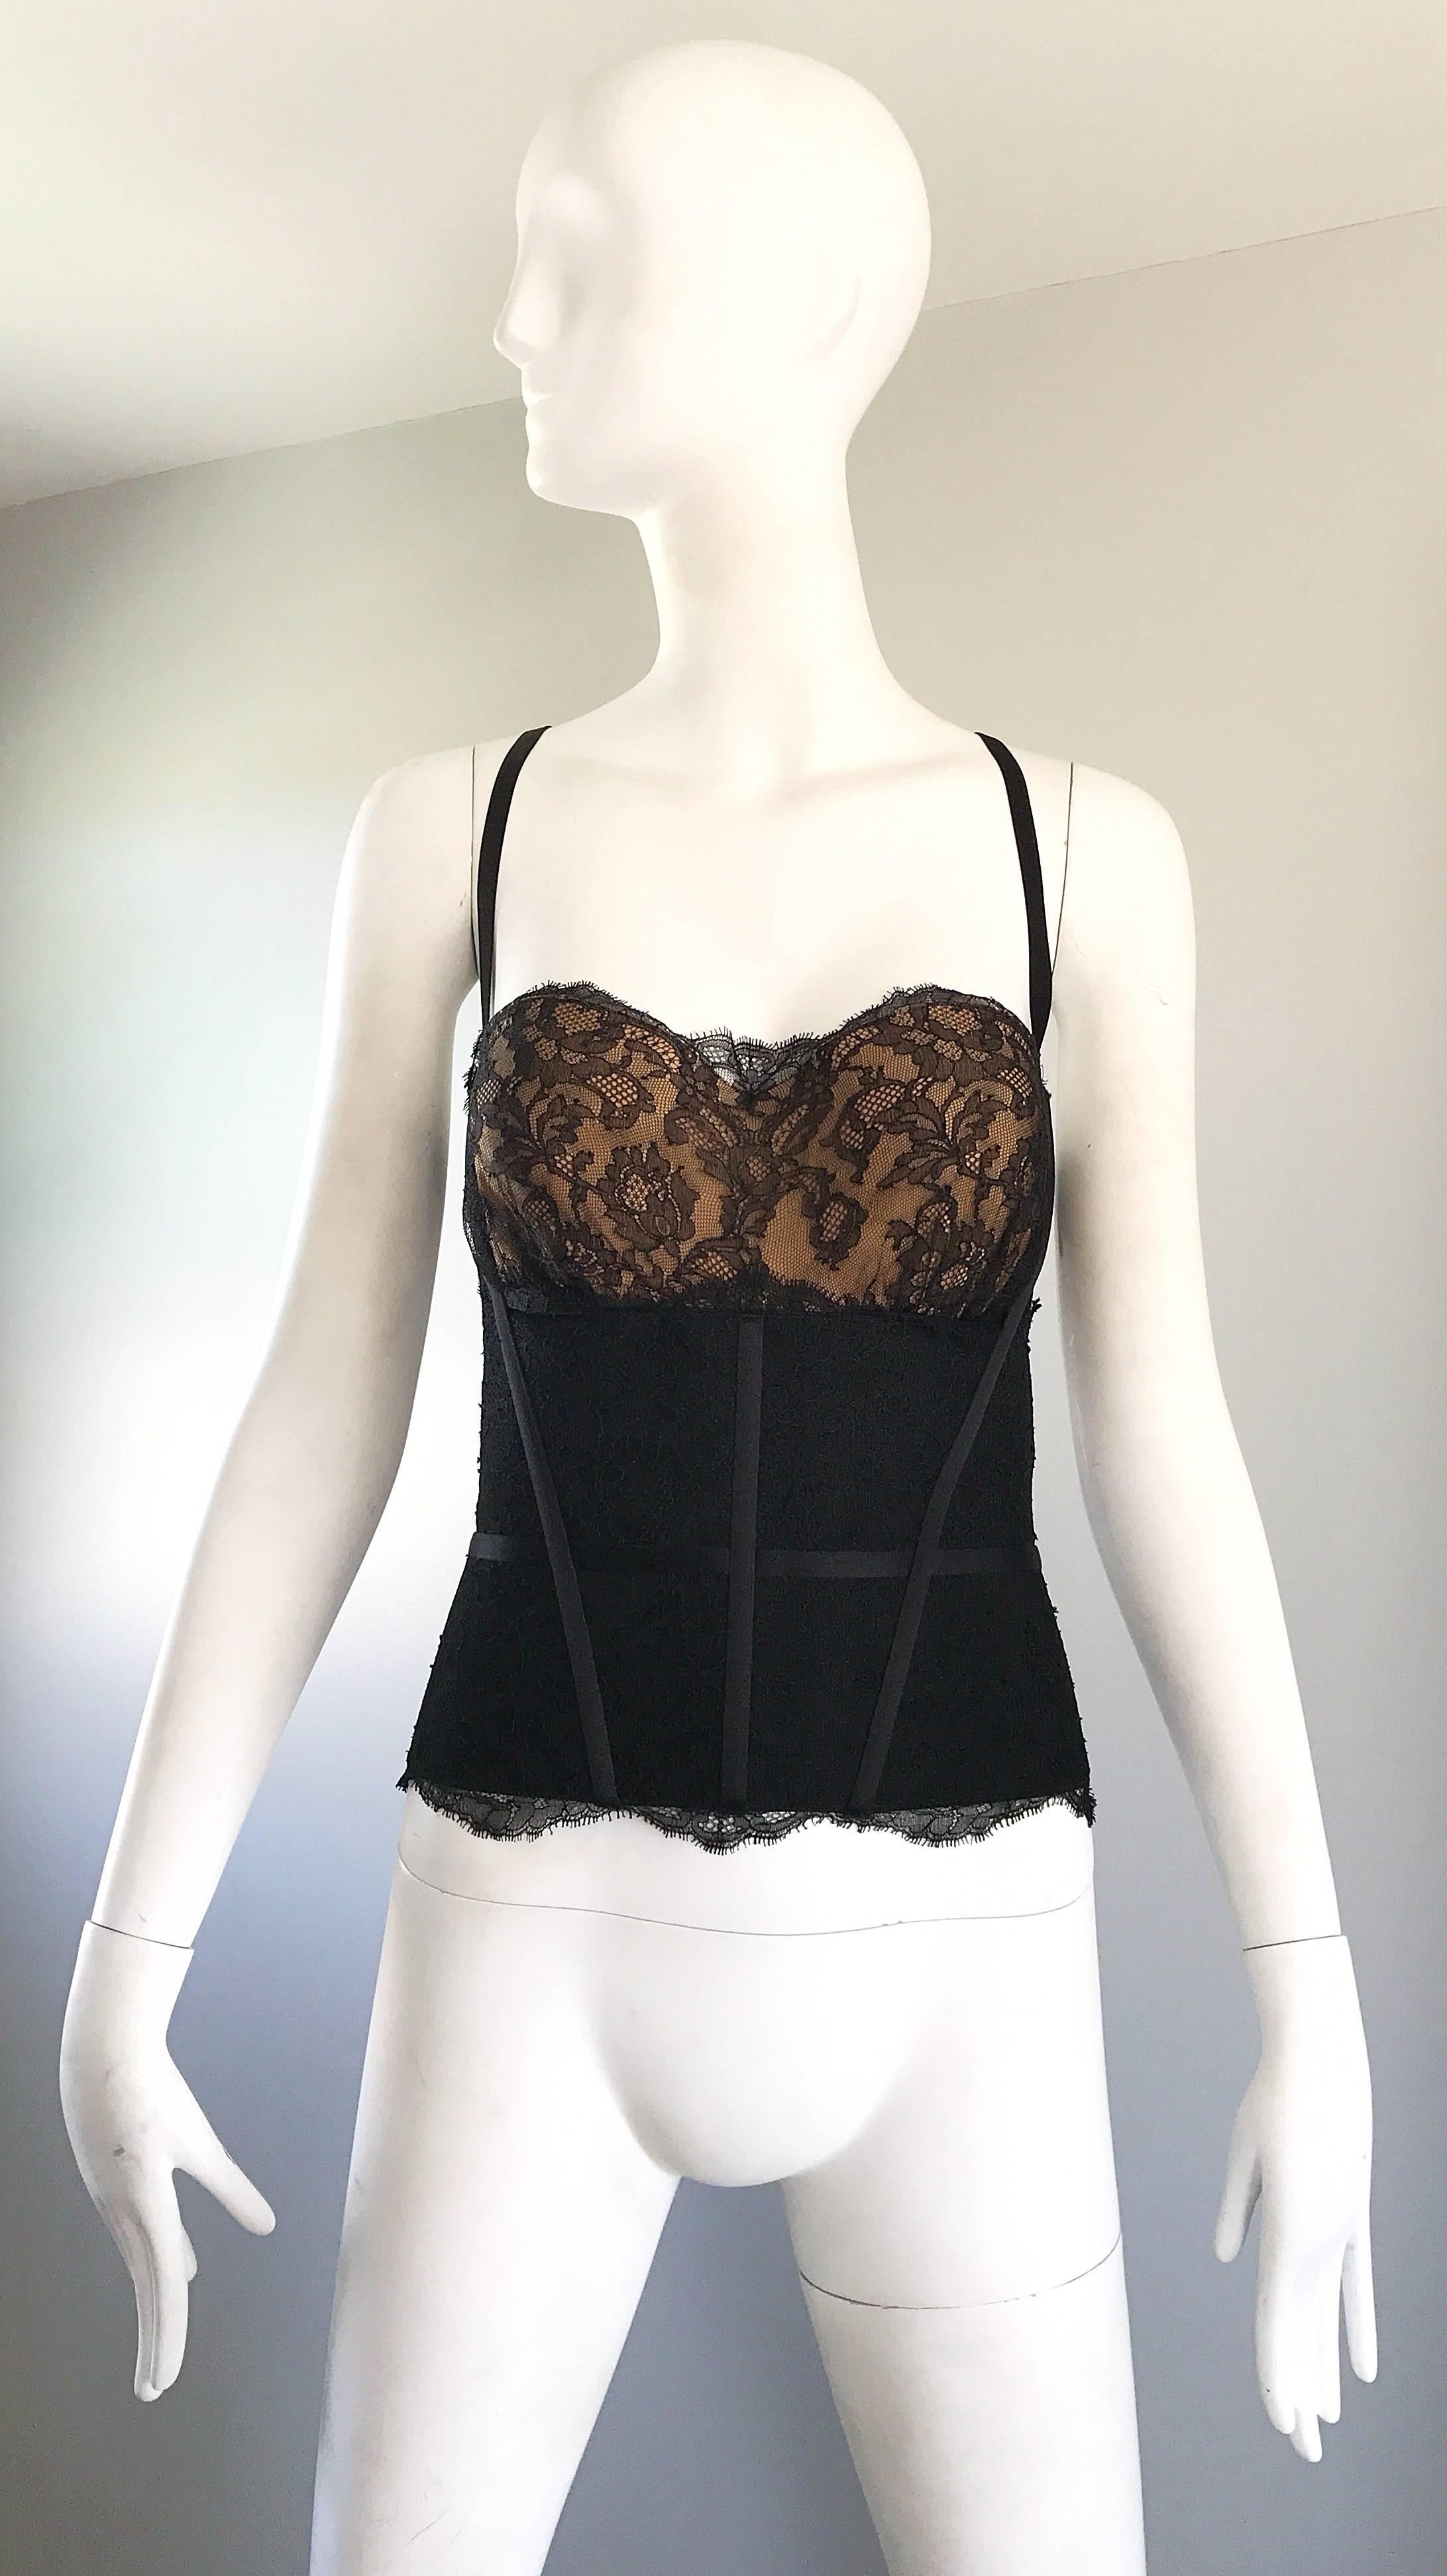 Sexy and never worn 1990s LA PERLA black and padded nude lace bustier top! Features a black elastic bodice that stretches to fit, with a nude elastic bust. Black lace overlay is elegant, yet seductive! Hidden zipper up the back with hook-and-eye